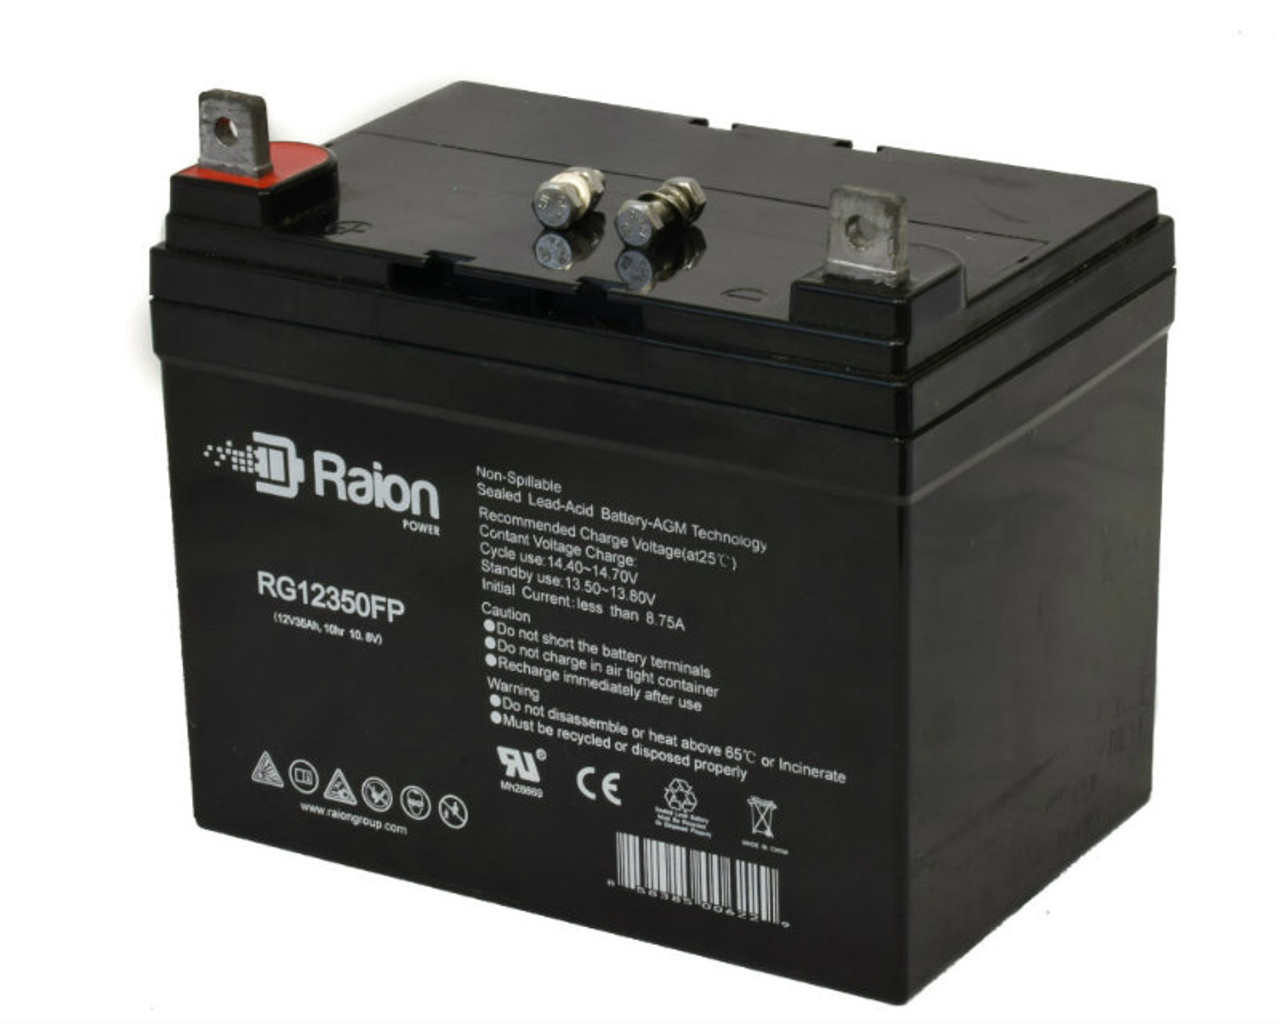 Raion Power Replacement 12V 35Ah RG12350FP Battery for Power Battery PRC-1235L